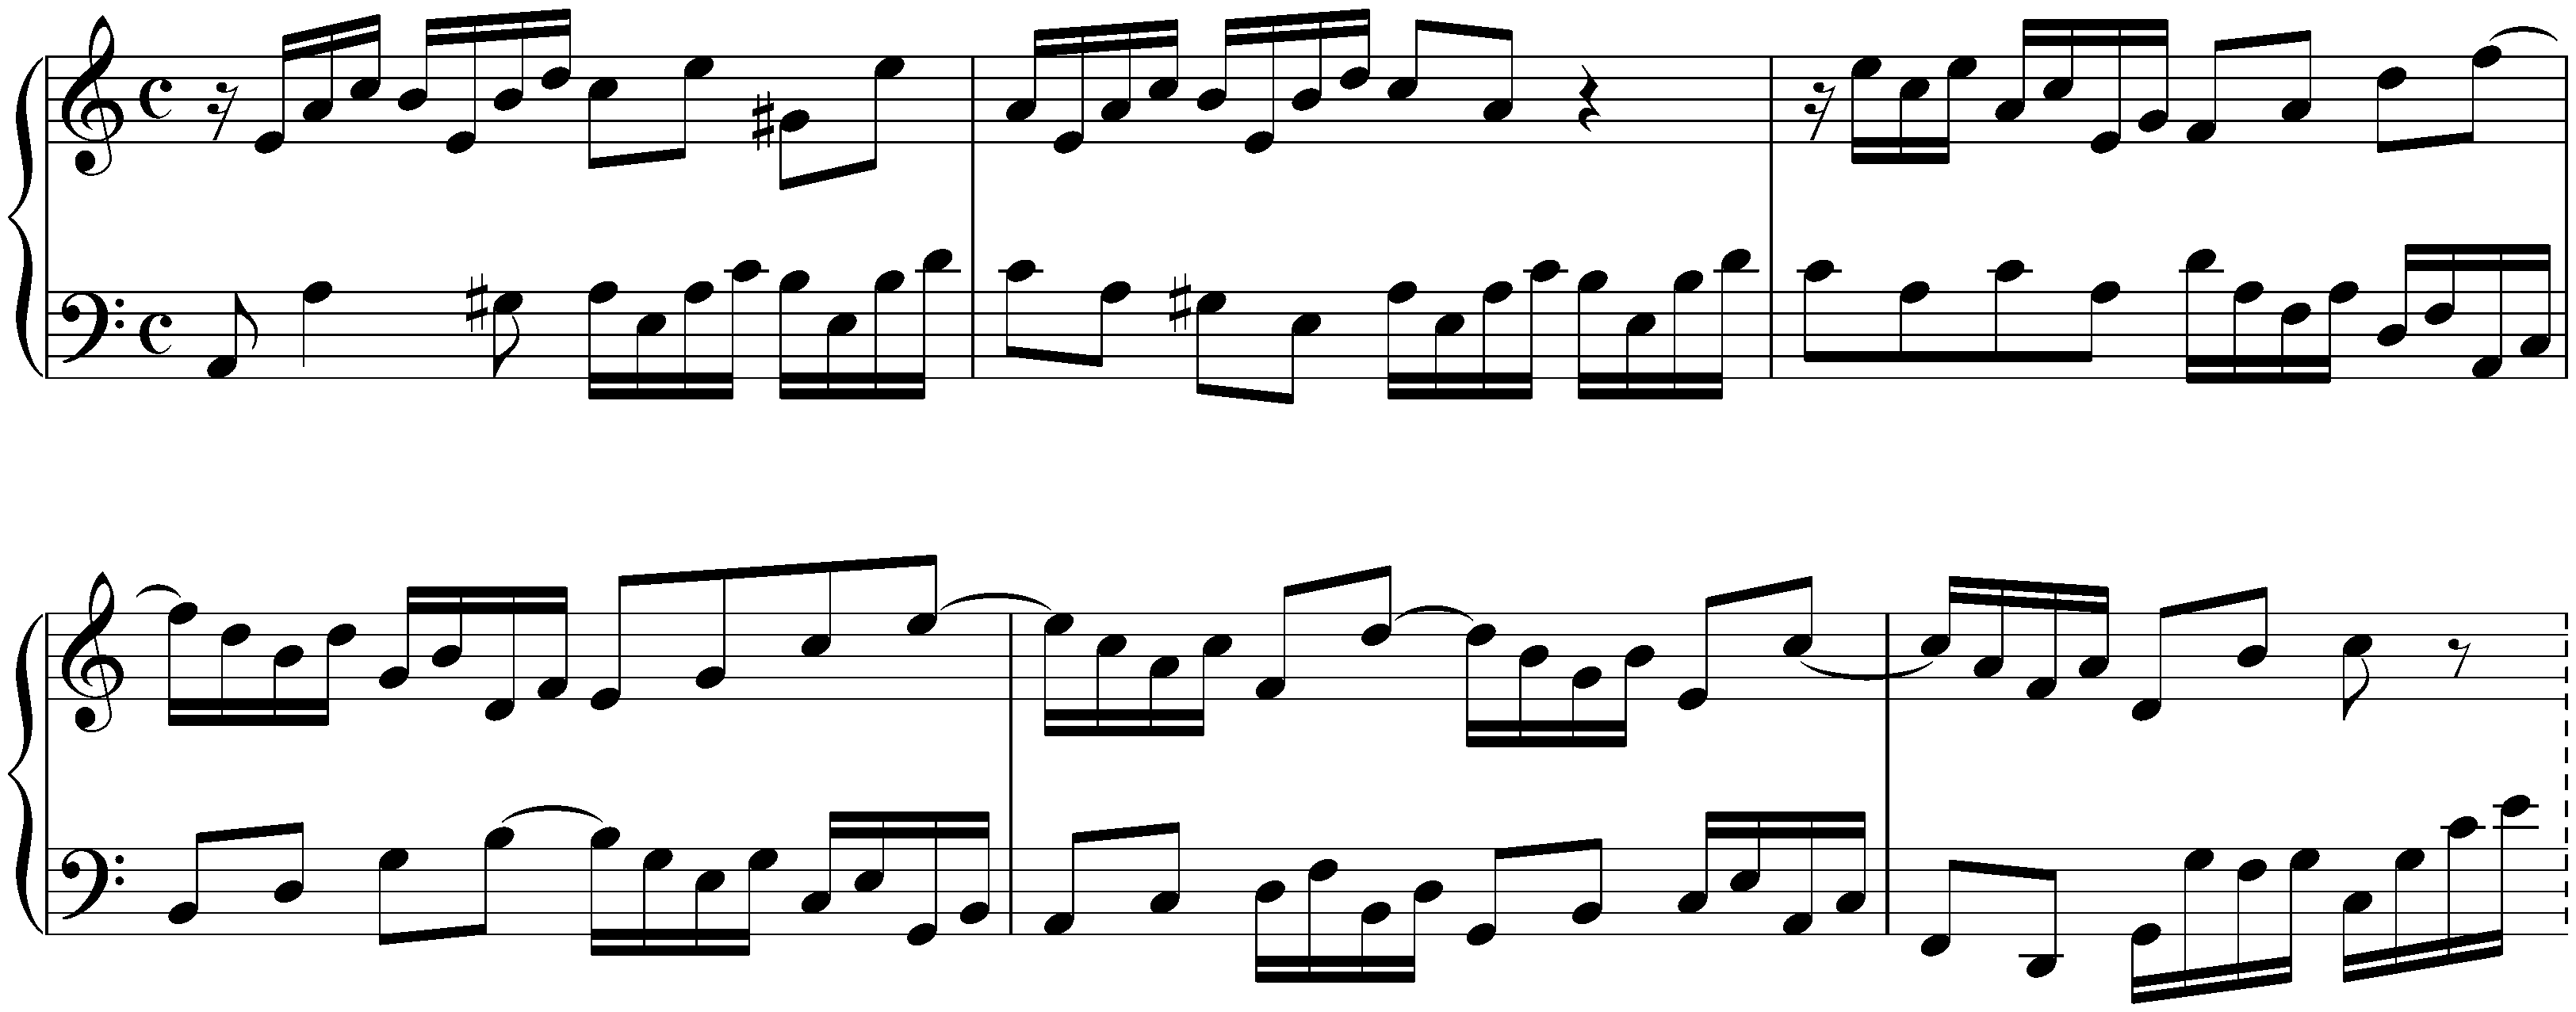 Fifteen Inventions, BWV 772–786; 13. A minor, BWV 784